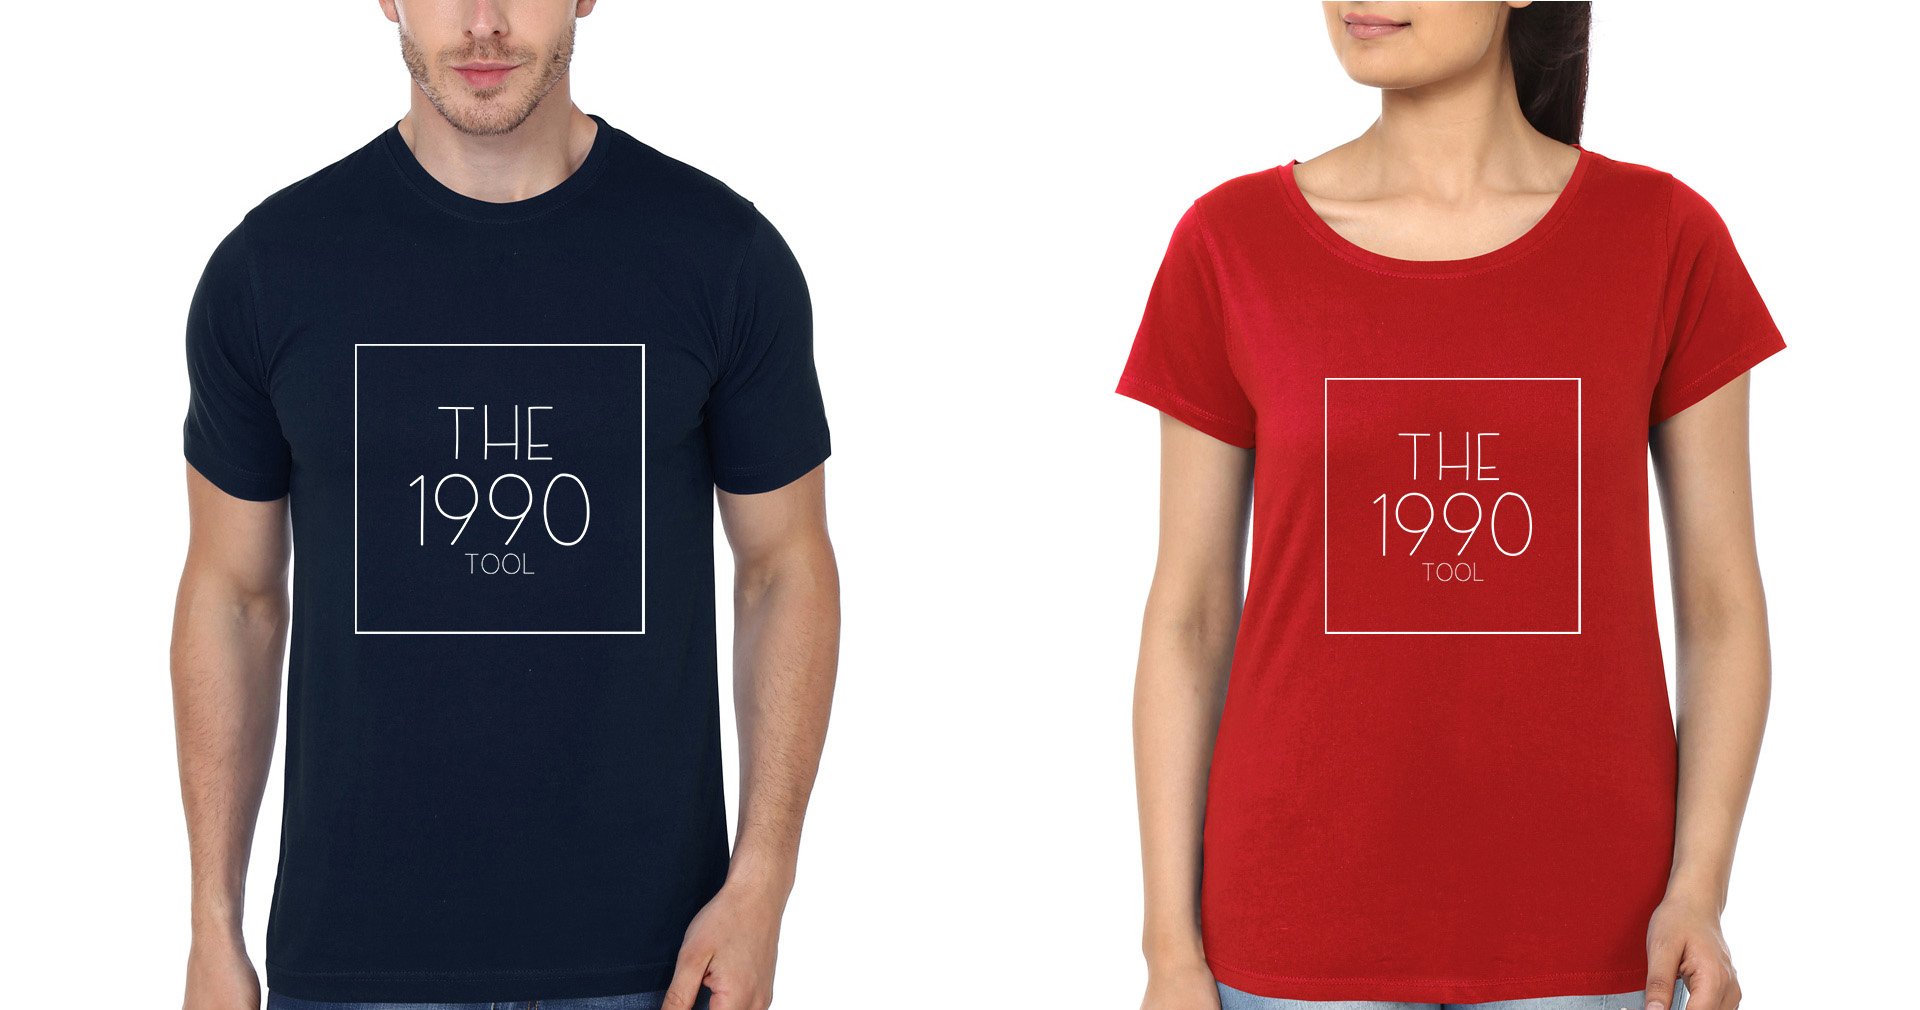 THE BIRTH YEAR TOOL Brother-Sister Half Sleeves T-Shirts -FunkyTees